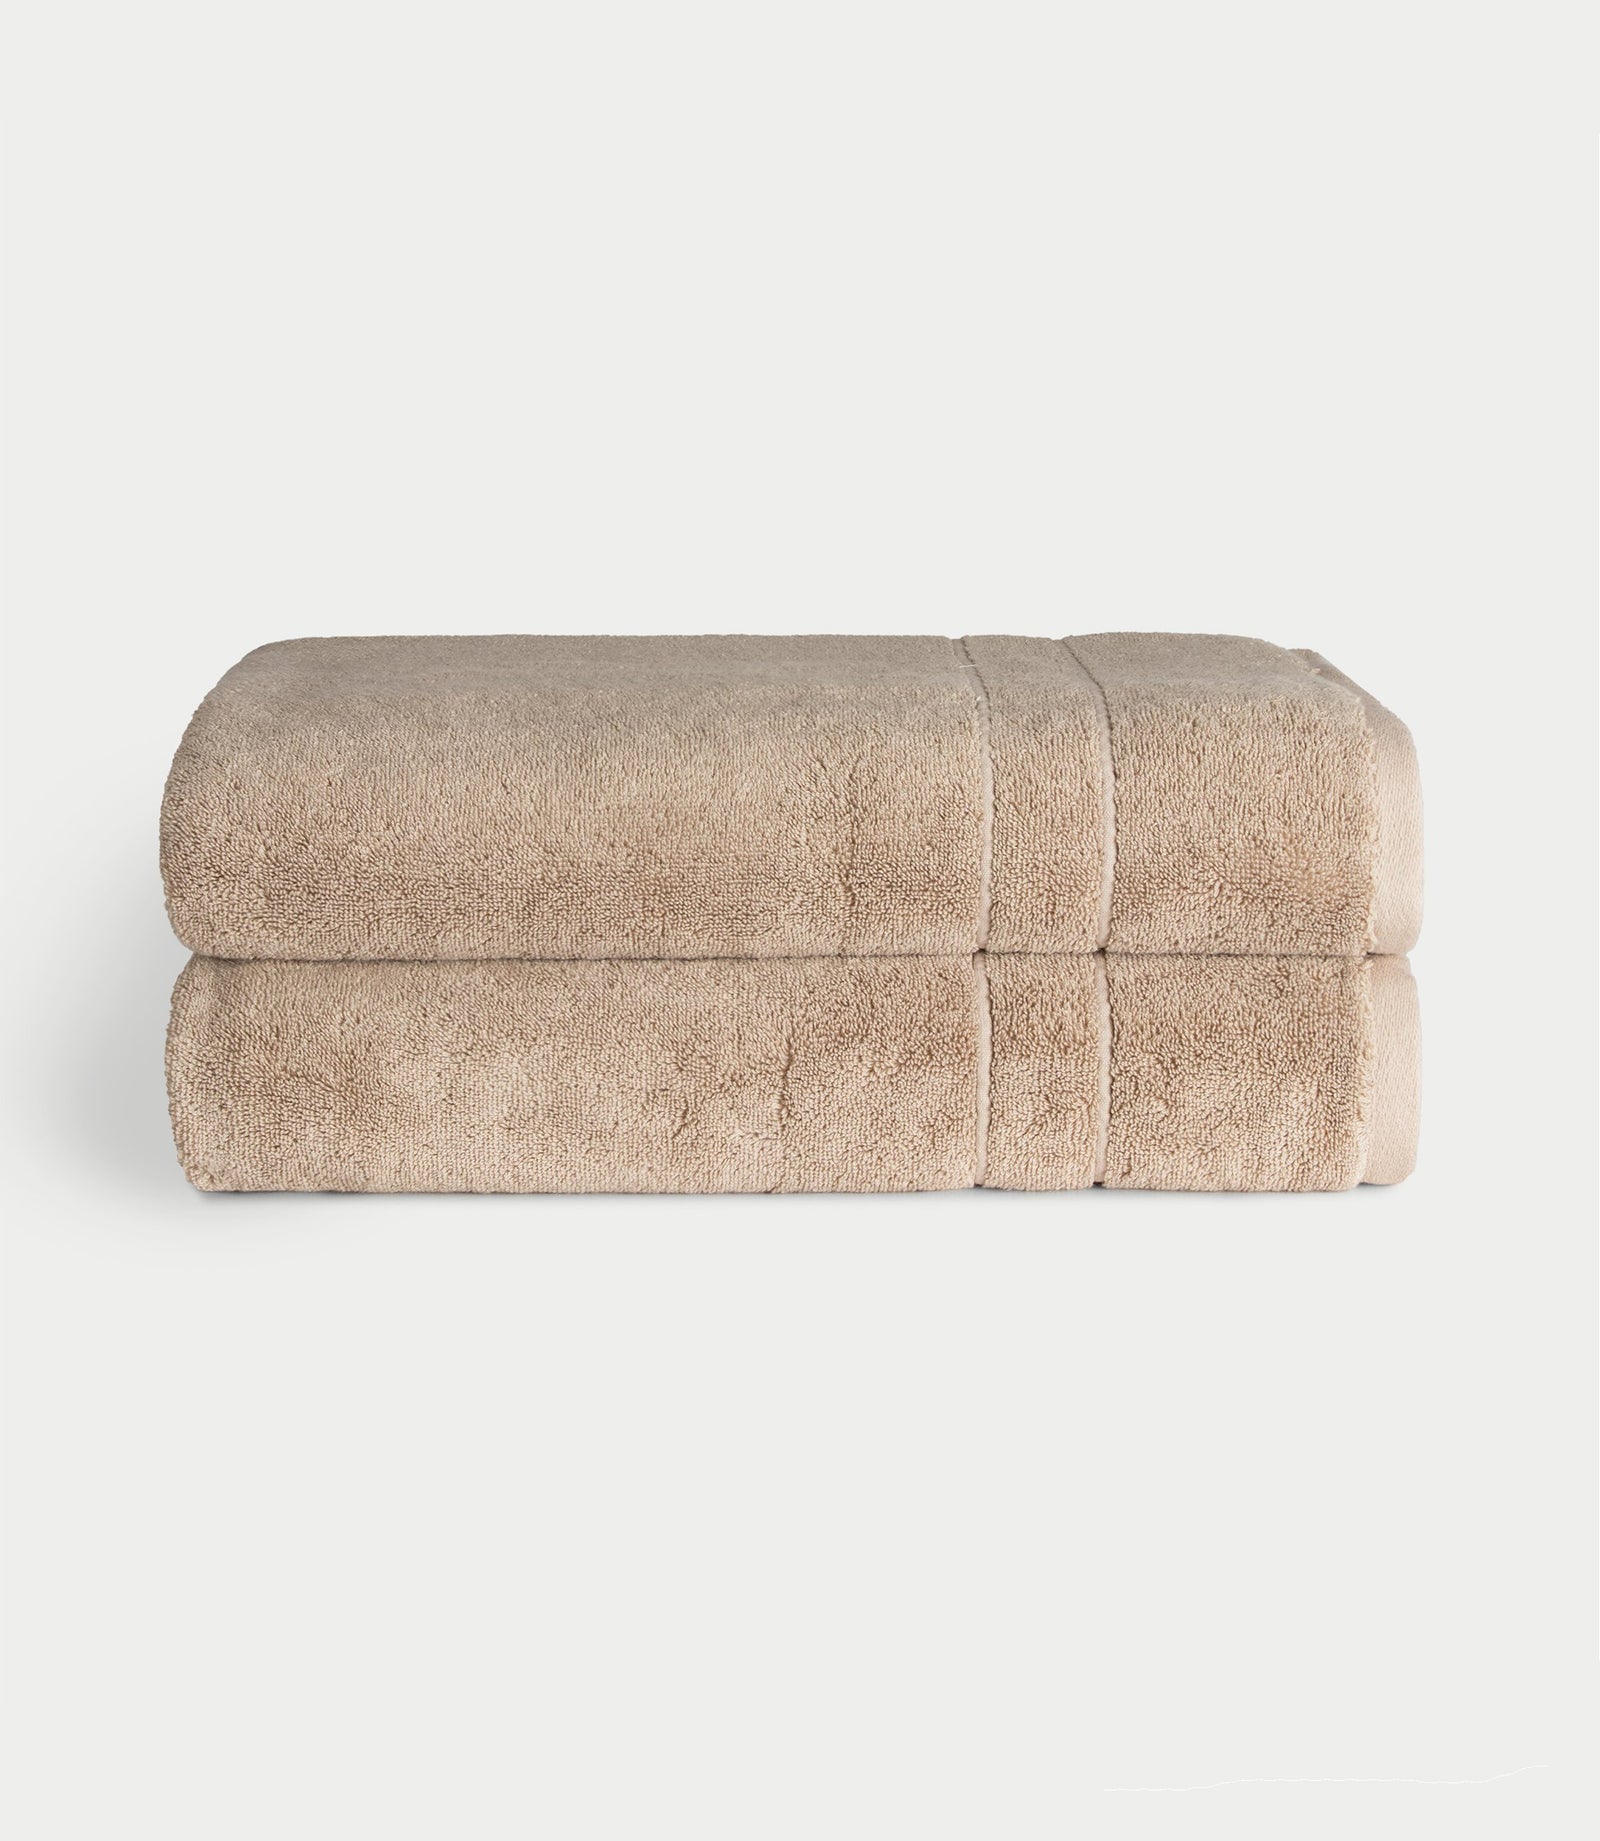 Premium Plush Bath Sheets in the color sand. Photo of bath sheets taken with white background 